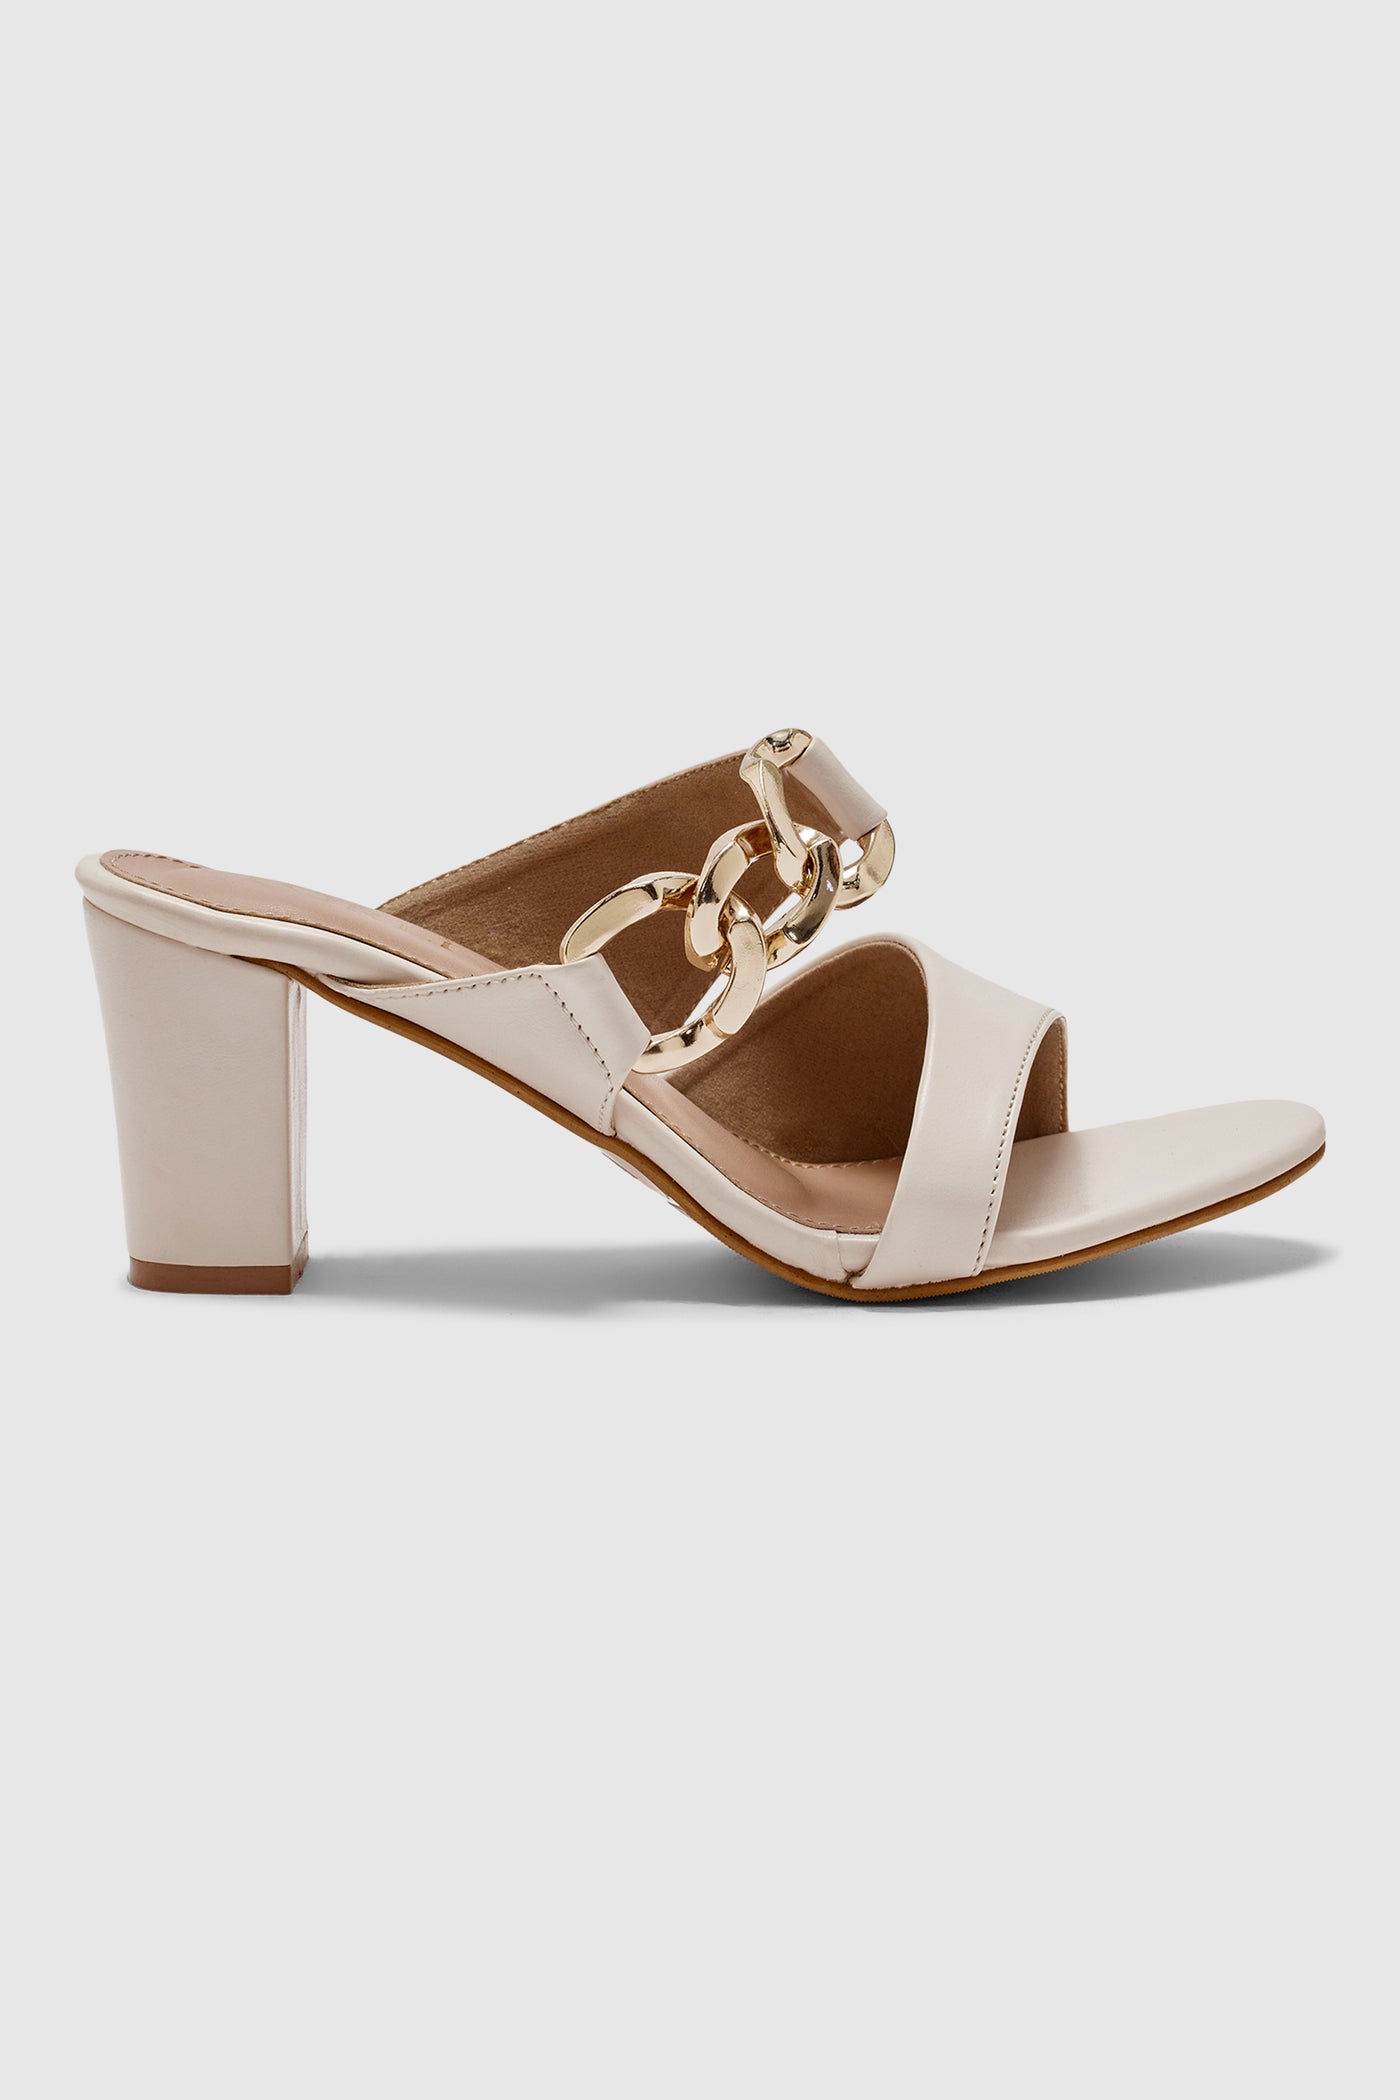 Azura Tan Leather Sandals- side view